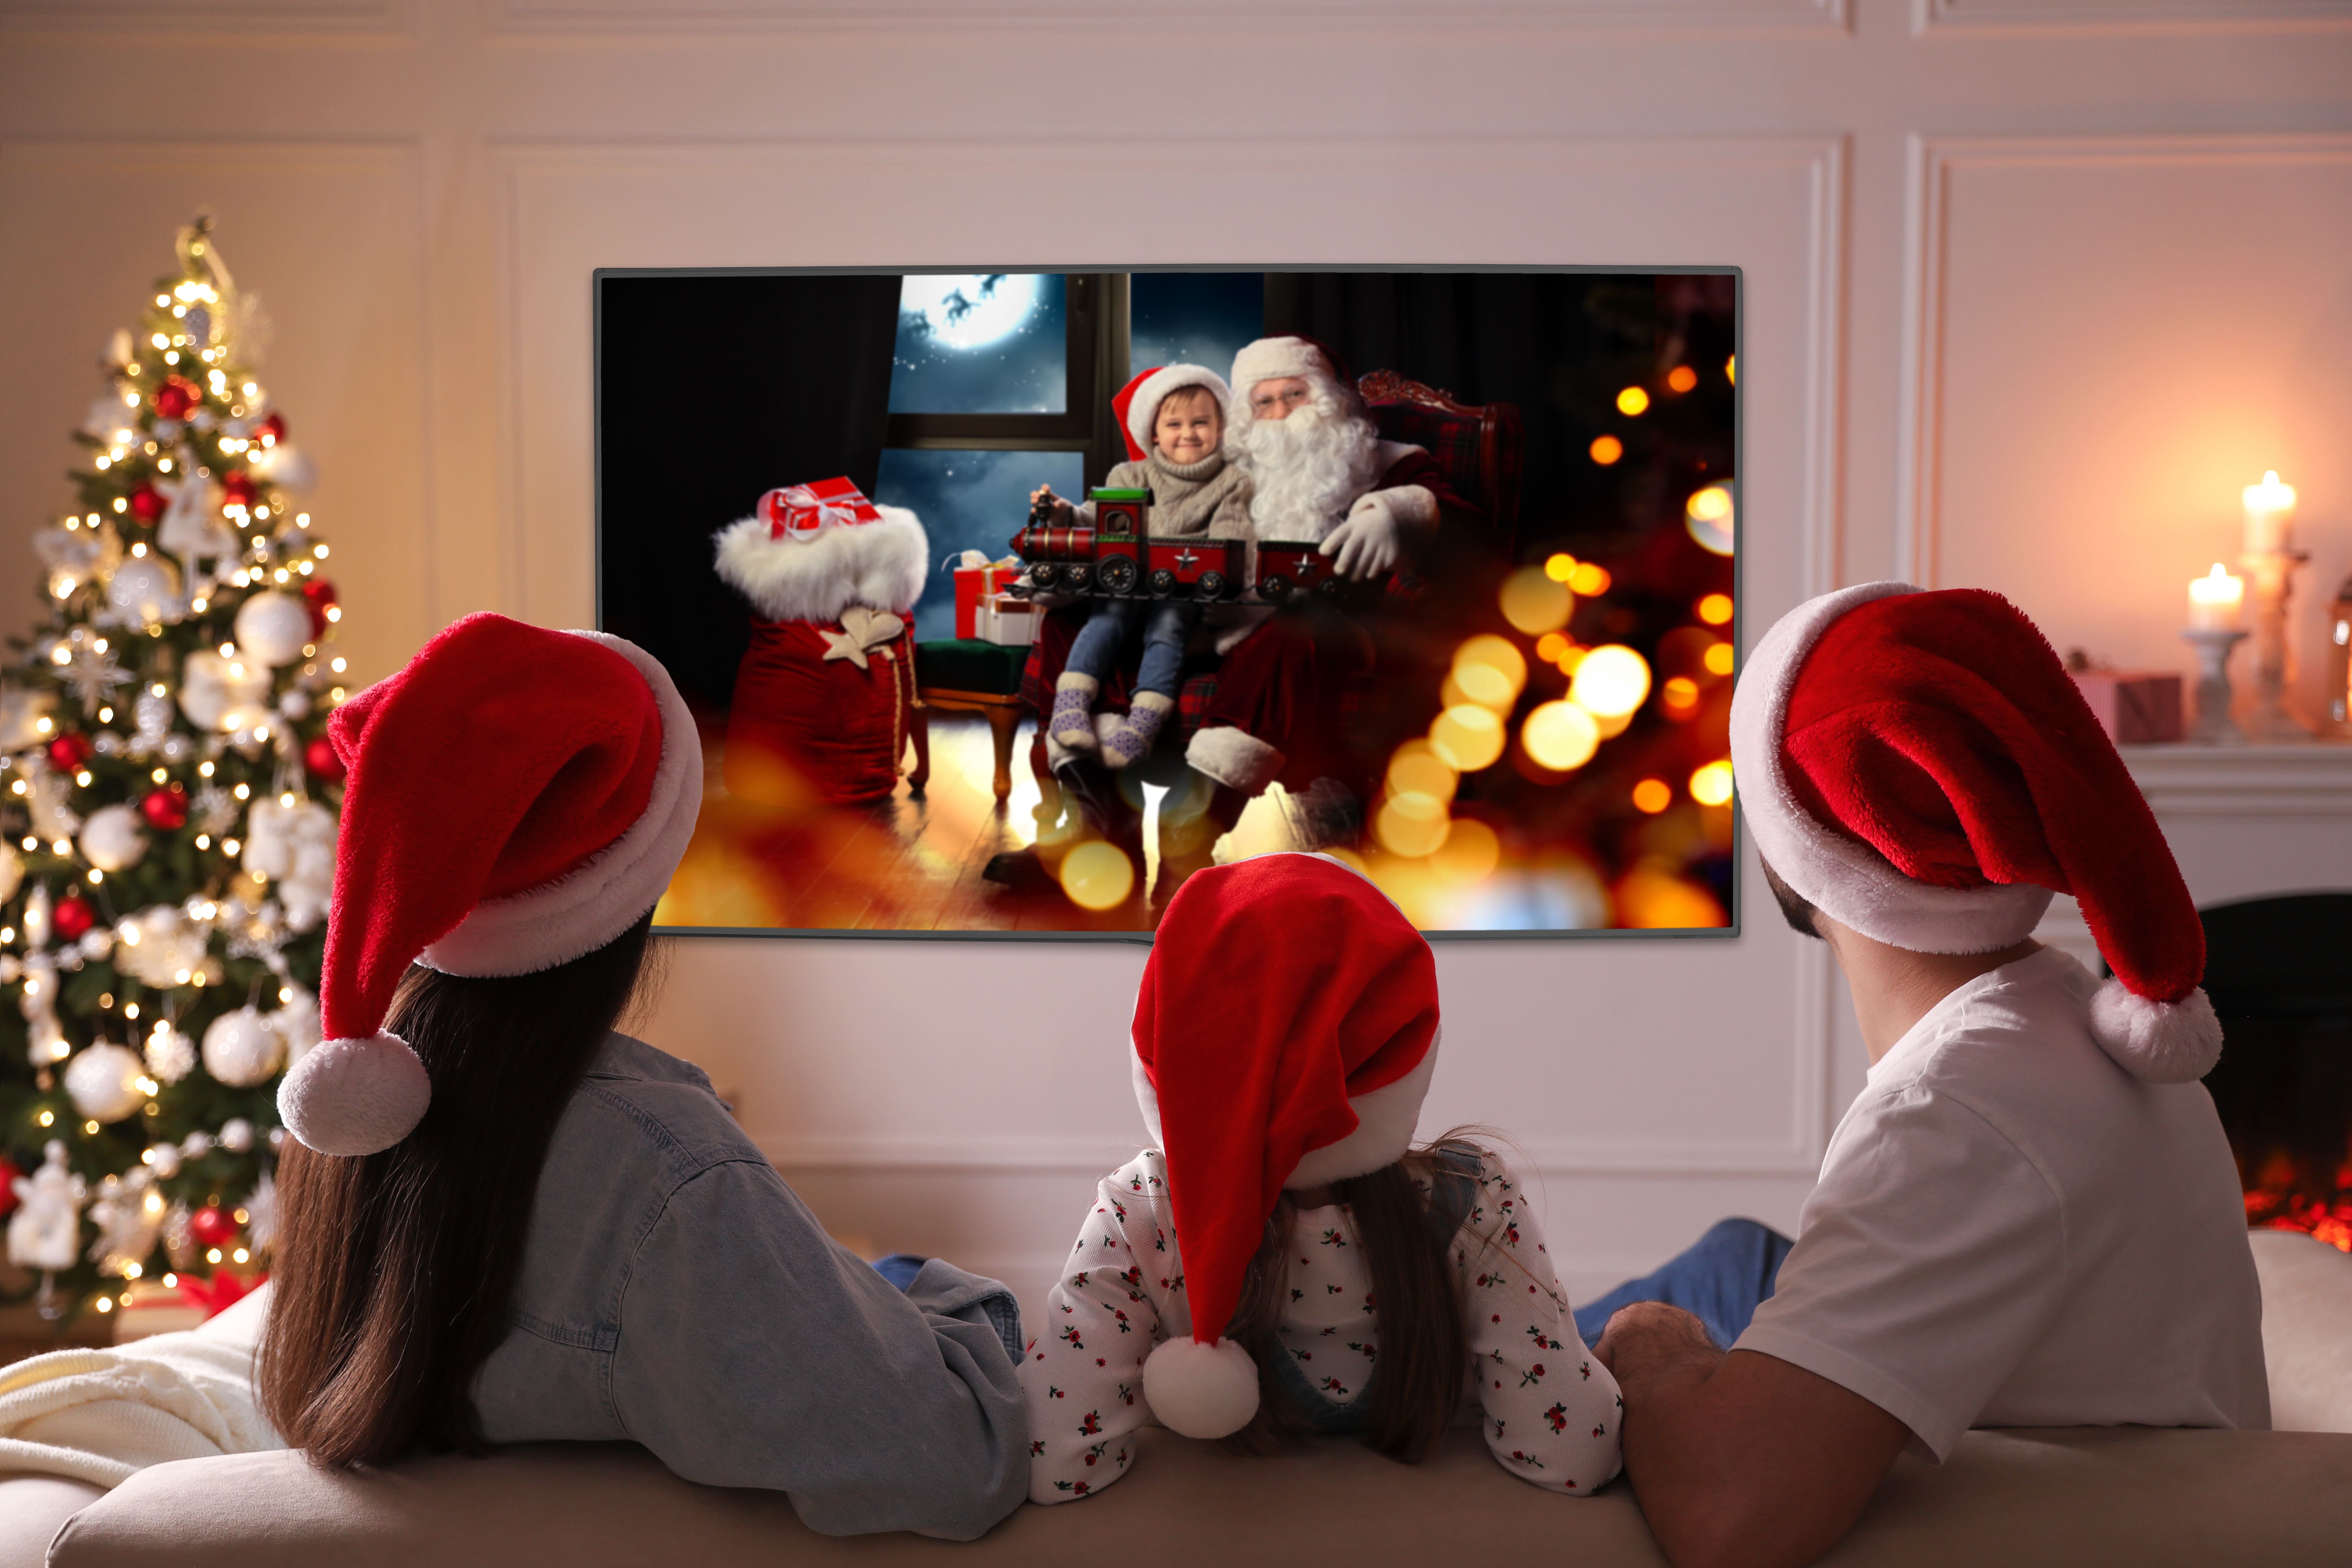 A family of three wearing Santa hats and snuggled close together while watching a Christmas film. The Christmas tree is twinkling with fairy lights beside the TV.